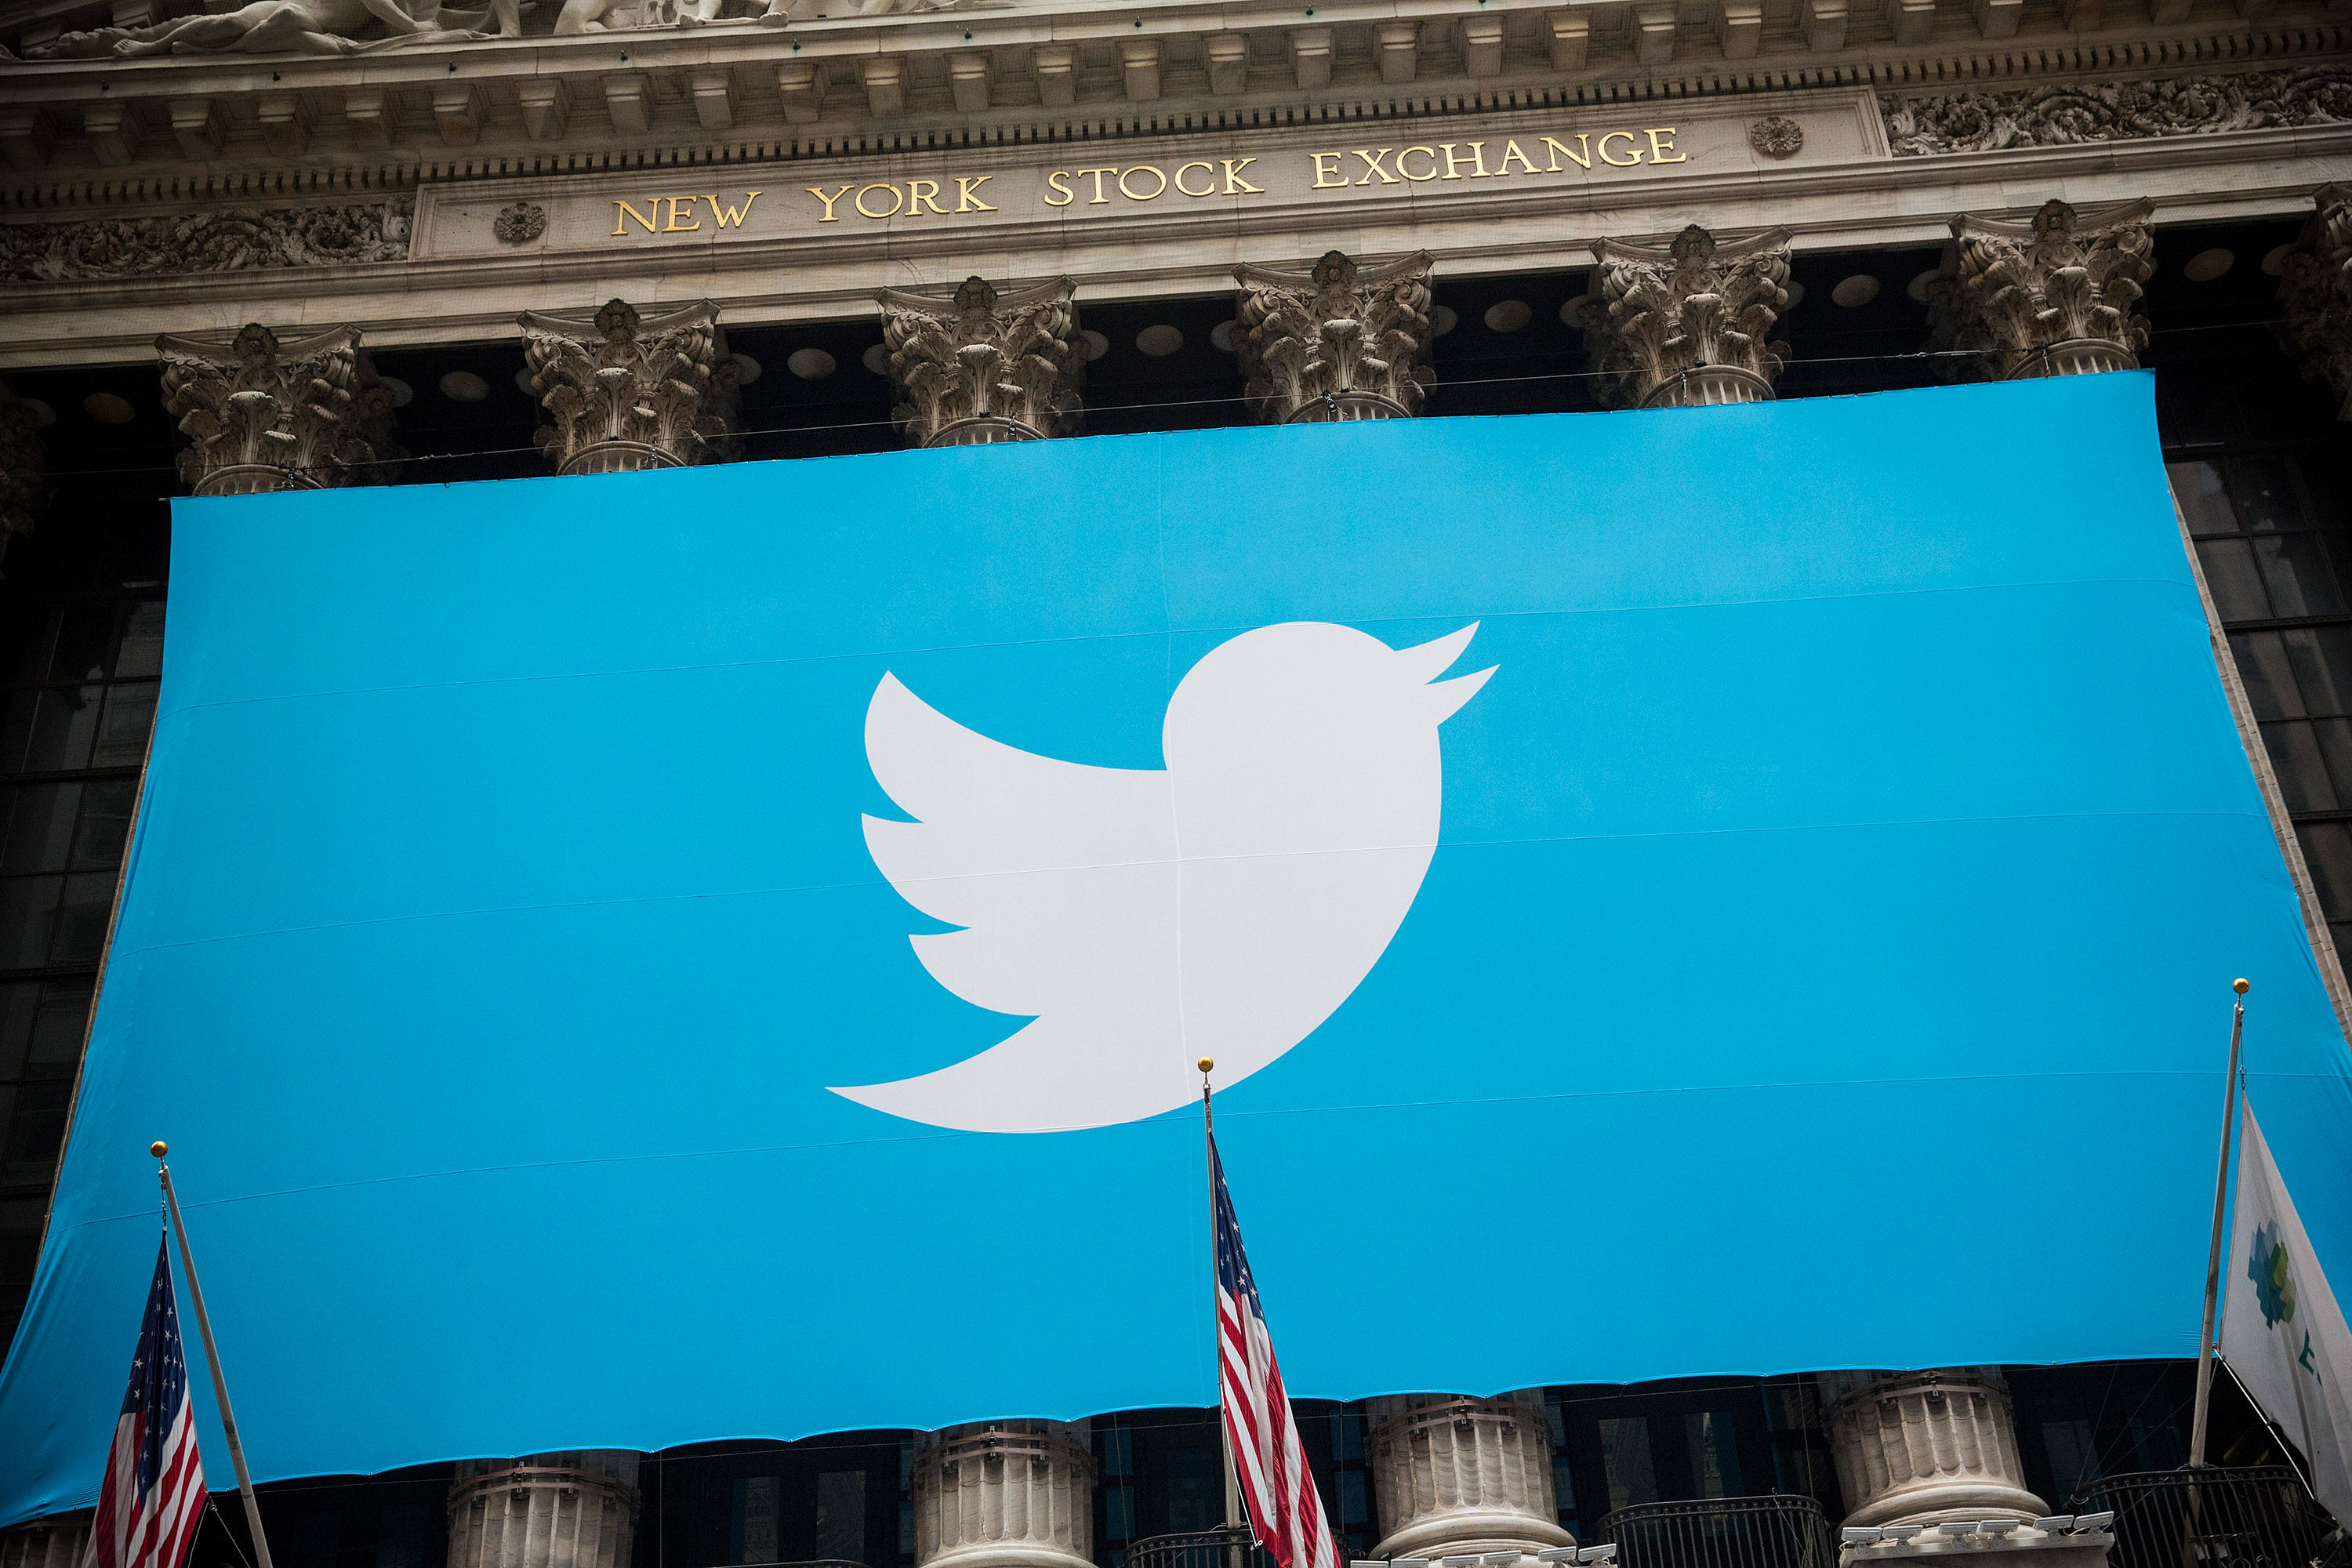 None of the eight were verified accounts, Twitter said, adding that it is contacting the owners of the affected accounts. Representative image/Credit: AFP Photo